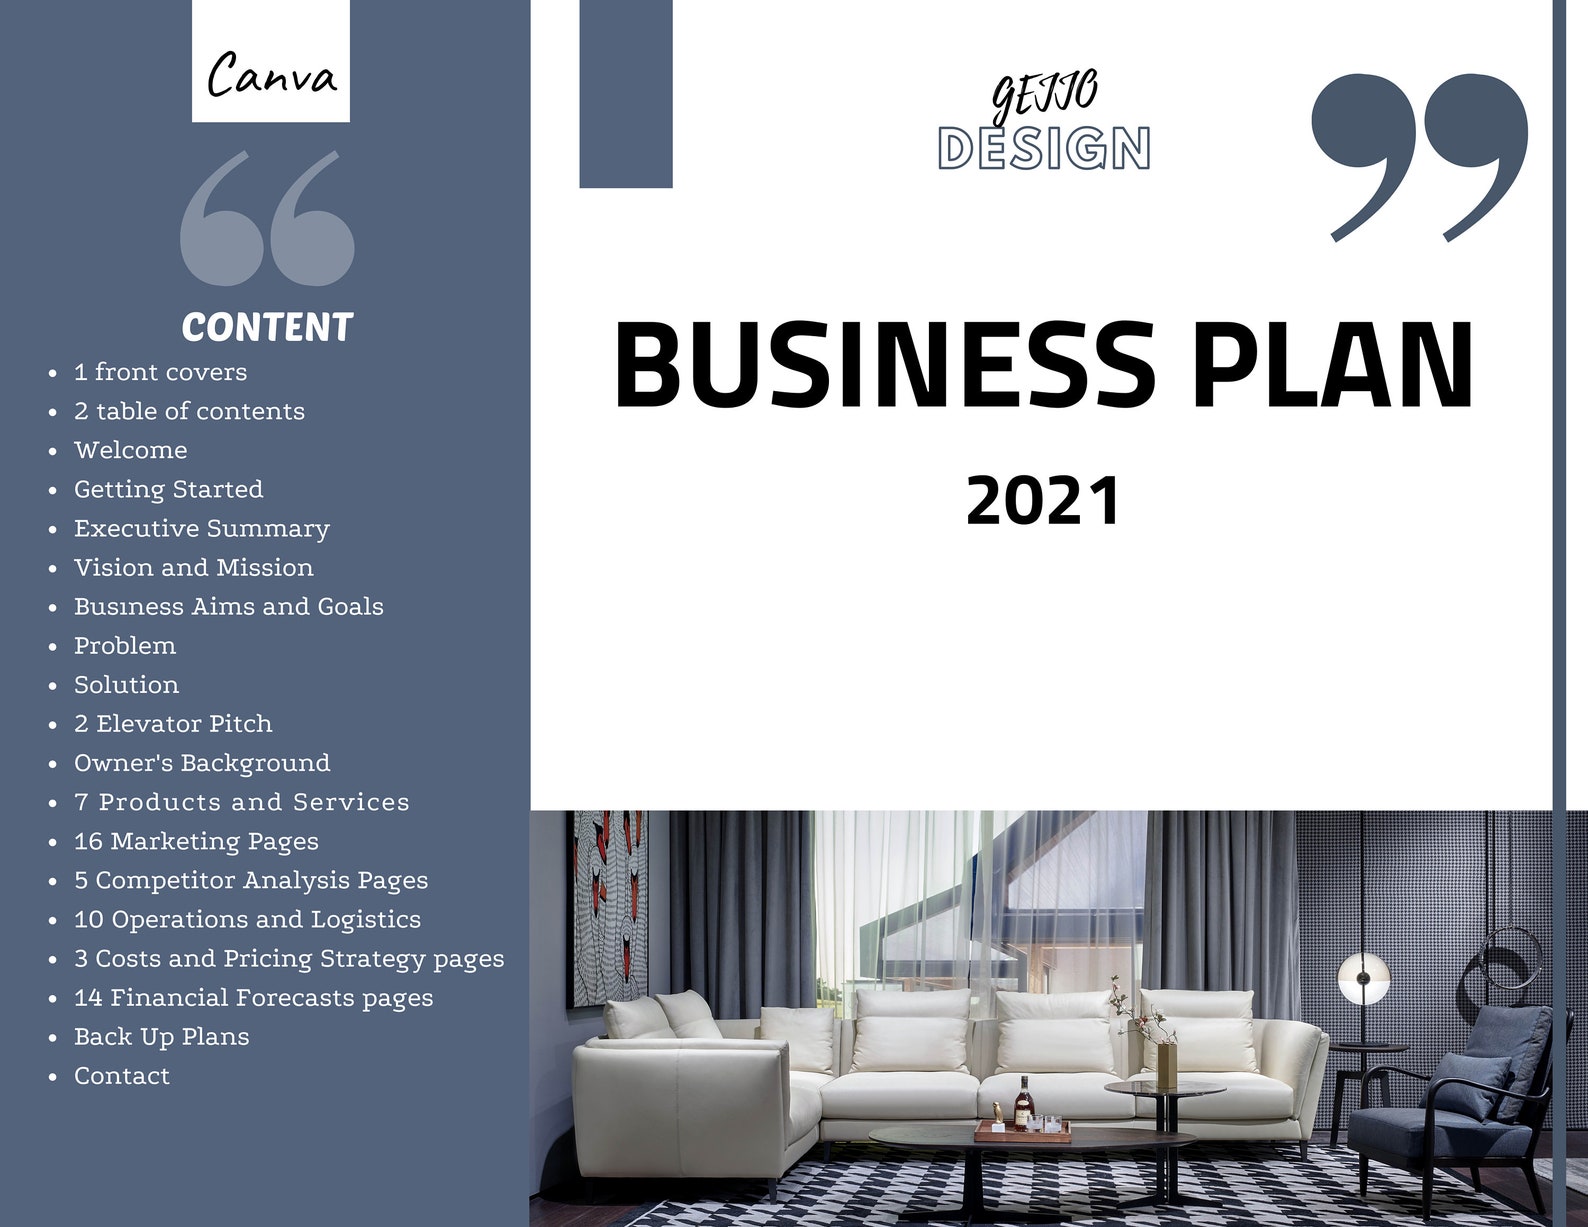 business plan on canva